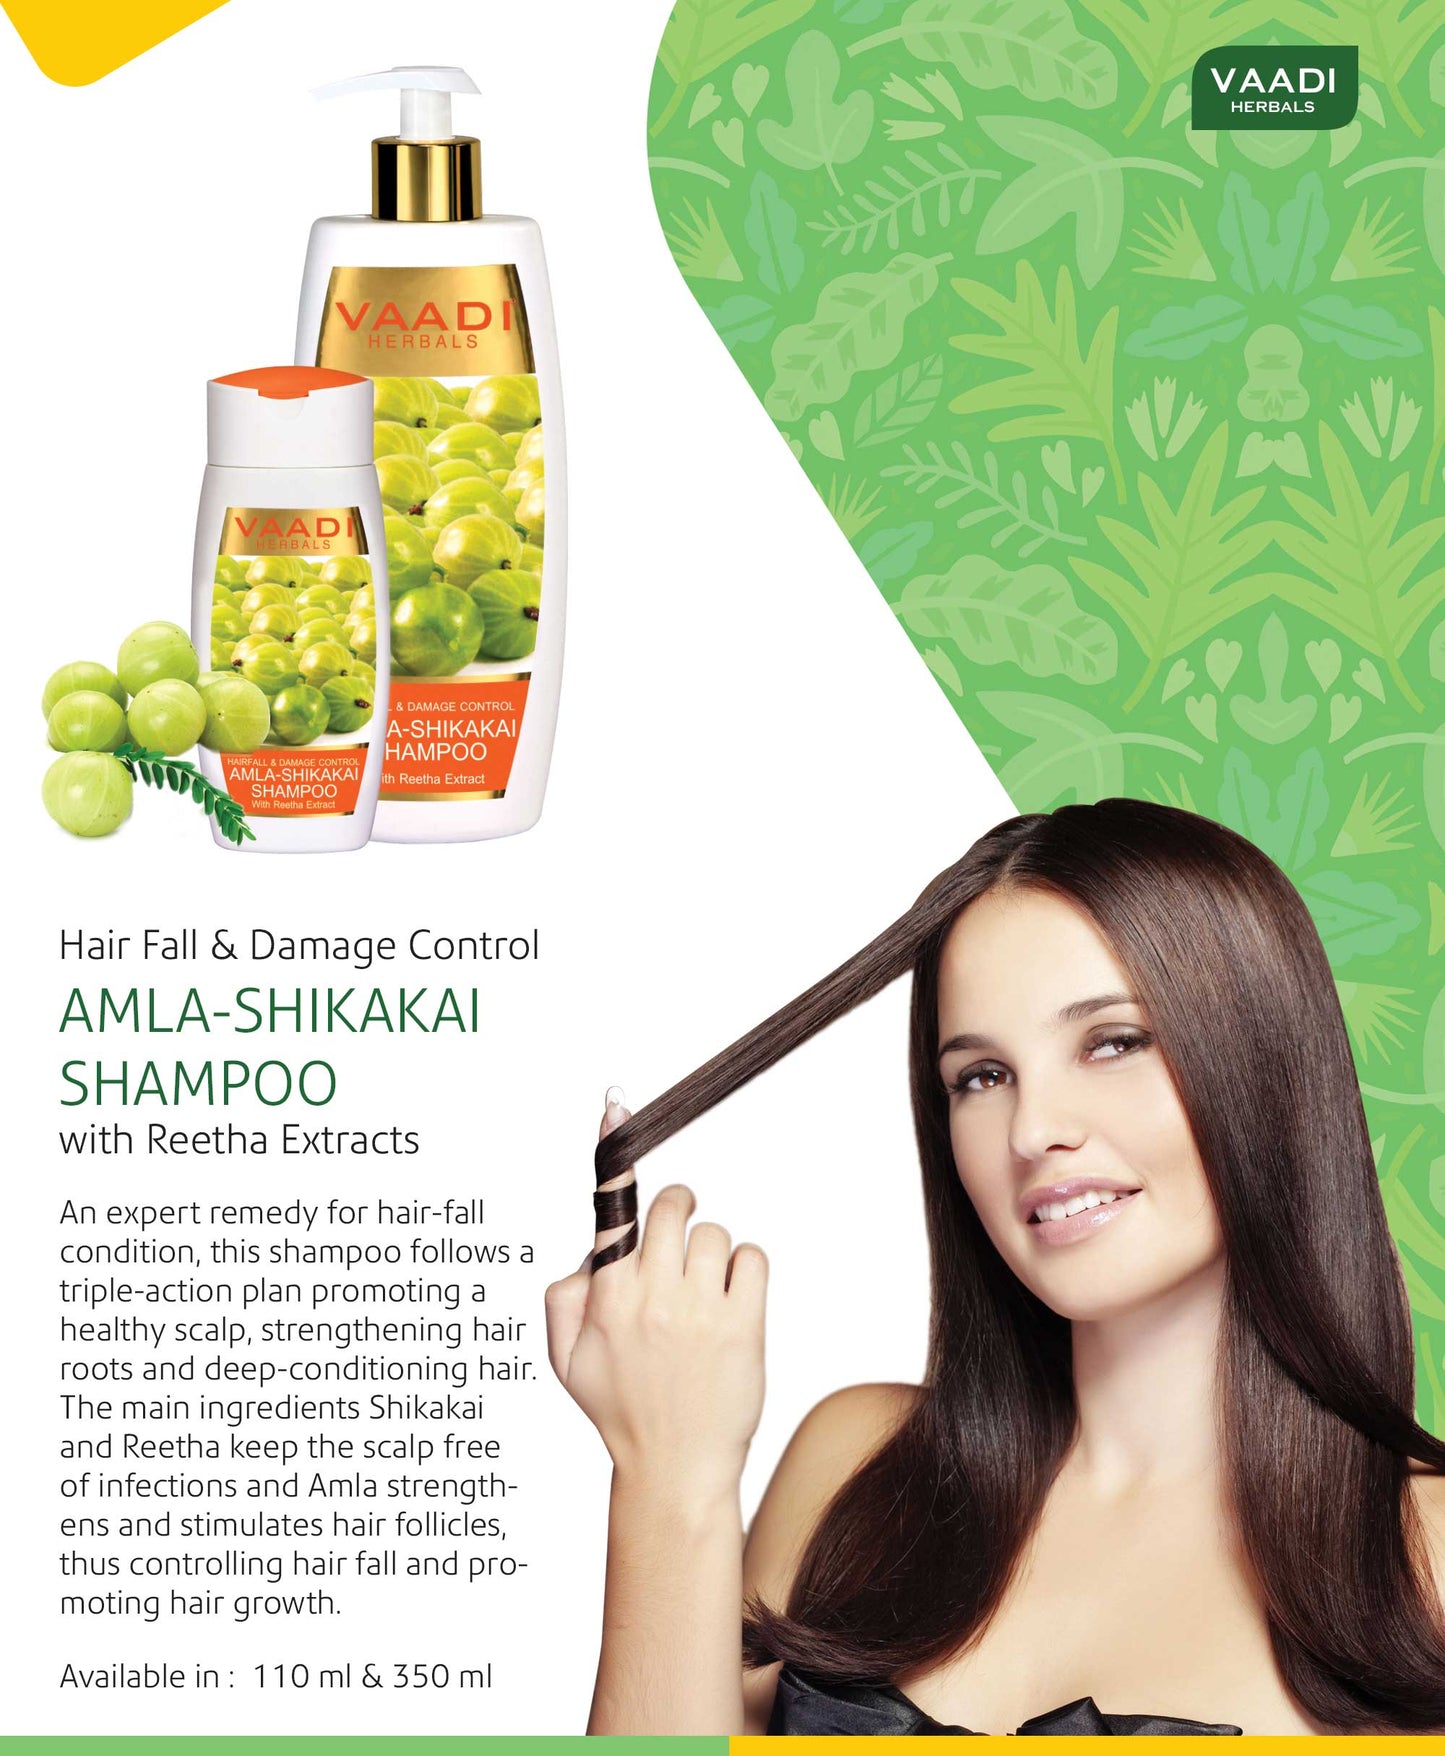 Hairfall & Damage Control Organic Shampoo (Indian Gooseberry Extract) - Promotes Hair Growth - Adds Shine to Hair (3 x 110 ml/4 fl oz)